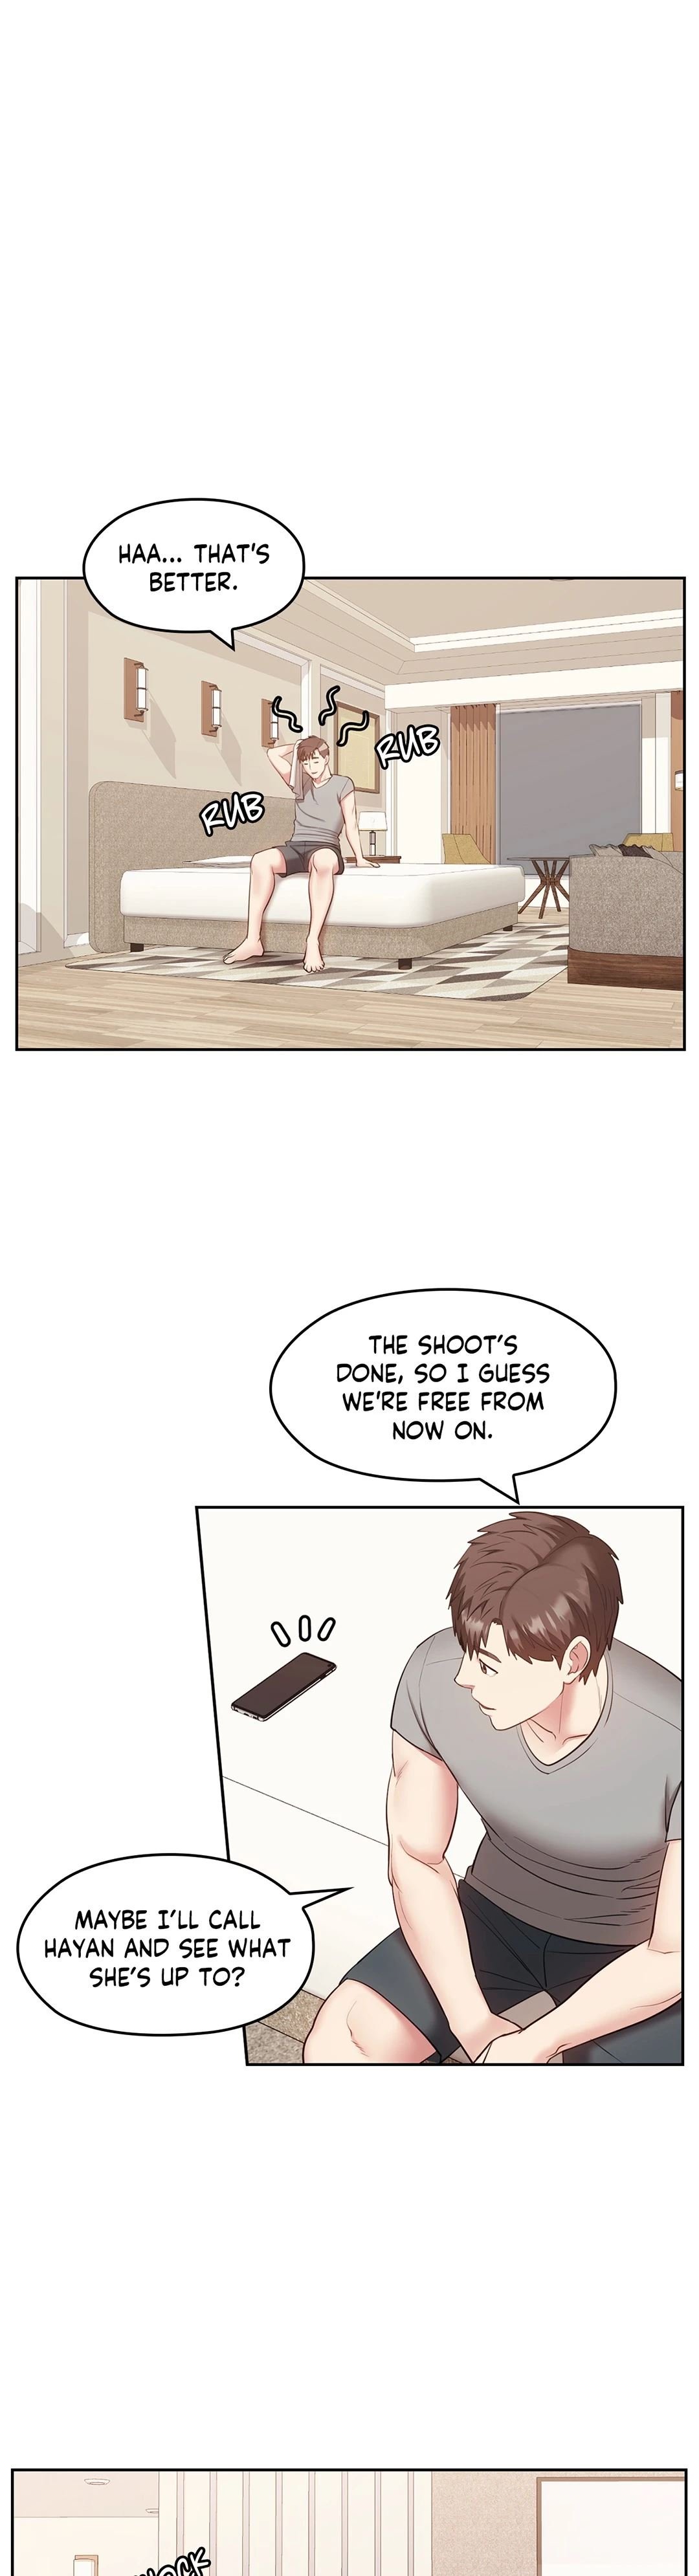 sexual-consulting-chap-39-17